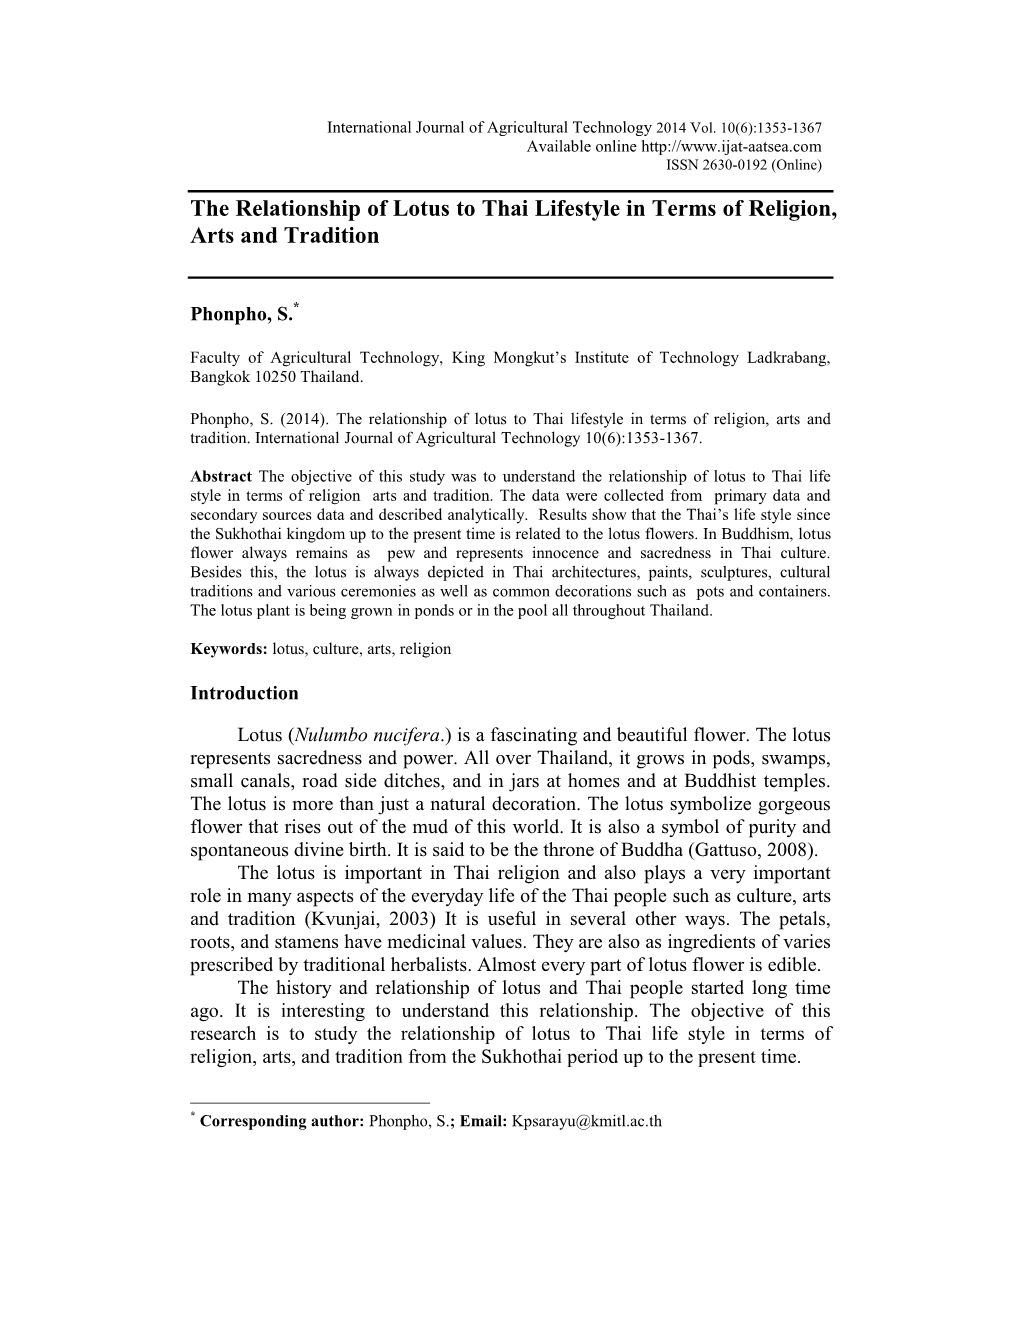 The Relationship of Lotus to Thai Lifestyle in Terms of Religion, Arts and Tradition. International Journal of Agricultural Technology 10(6):1353-1367